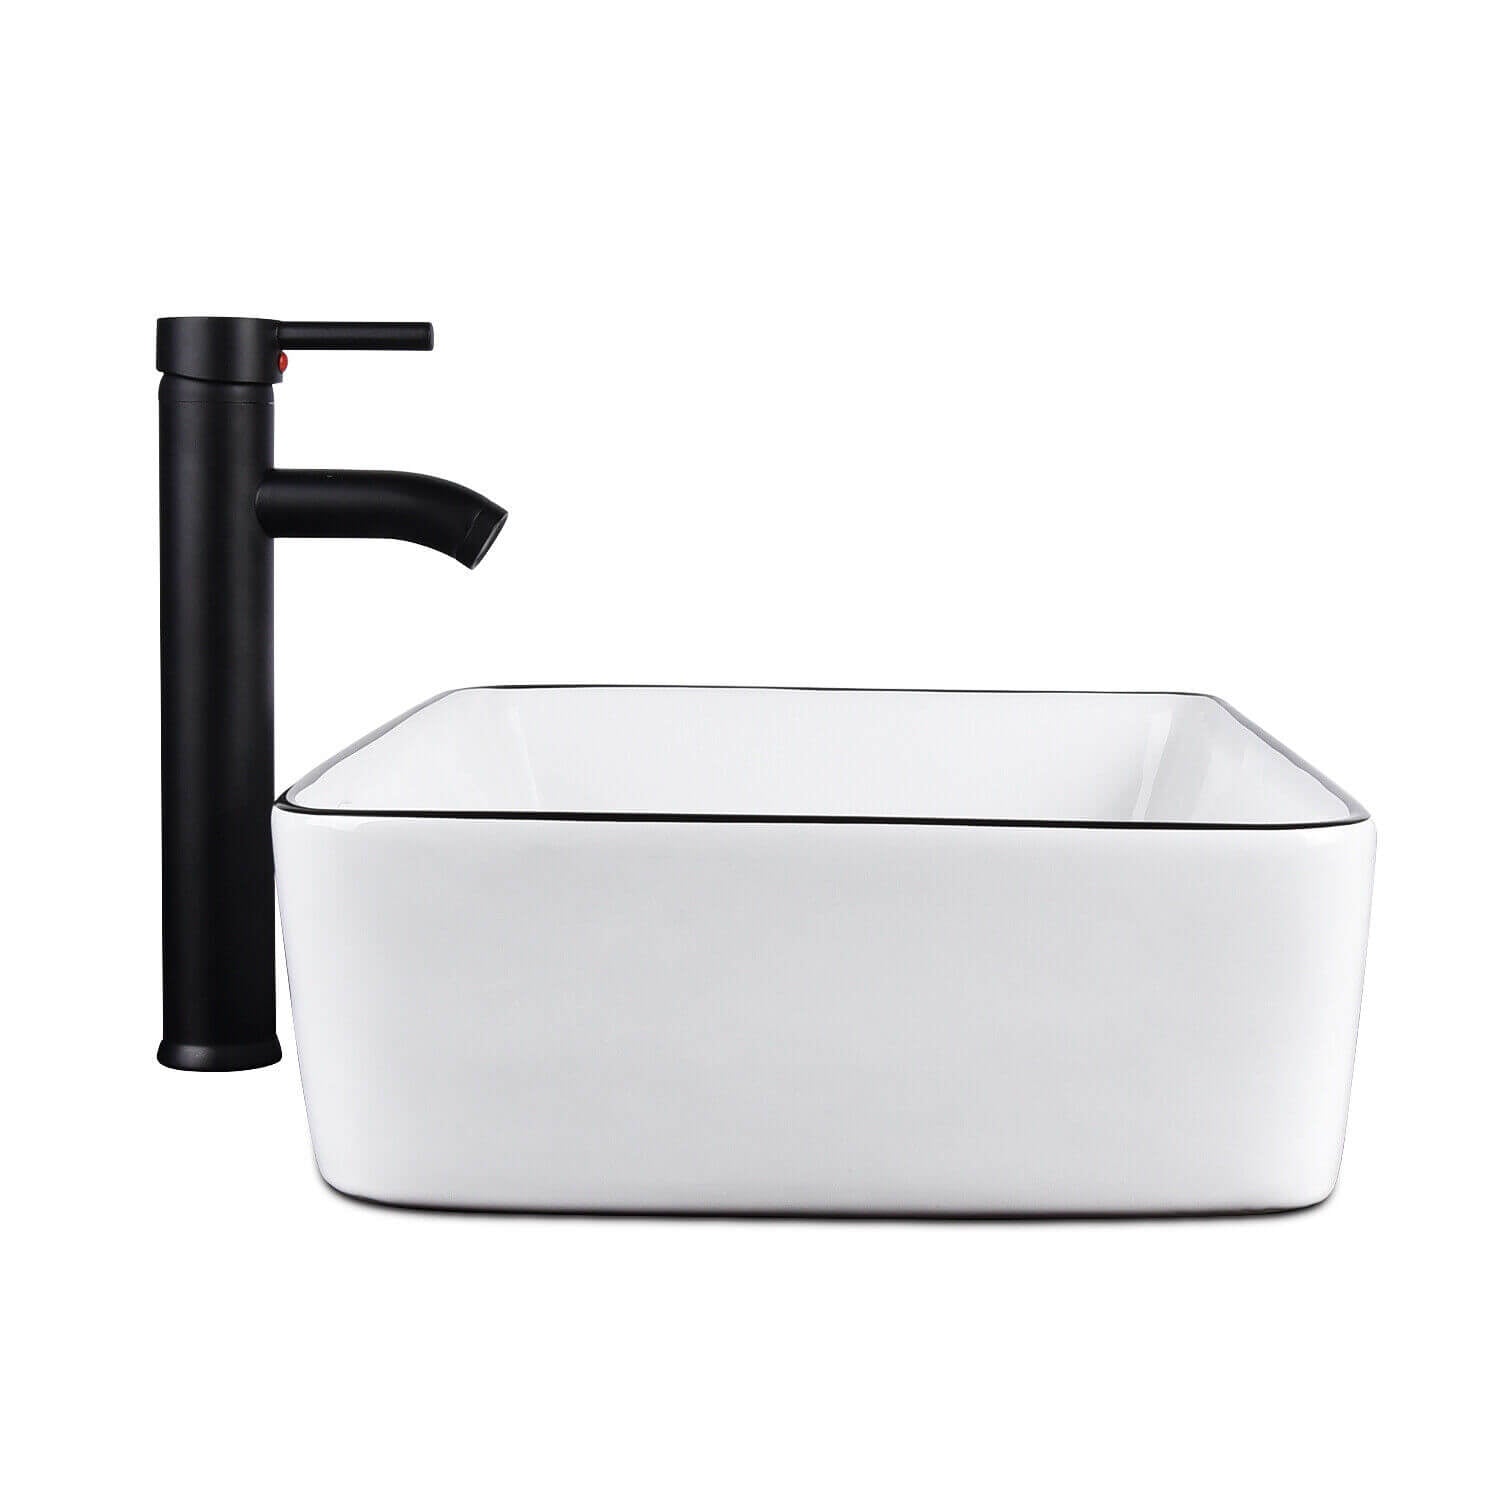 Side of Elecwish rectangular Ceramic Vessel Sink with Faucet